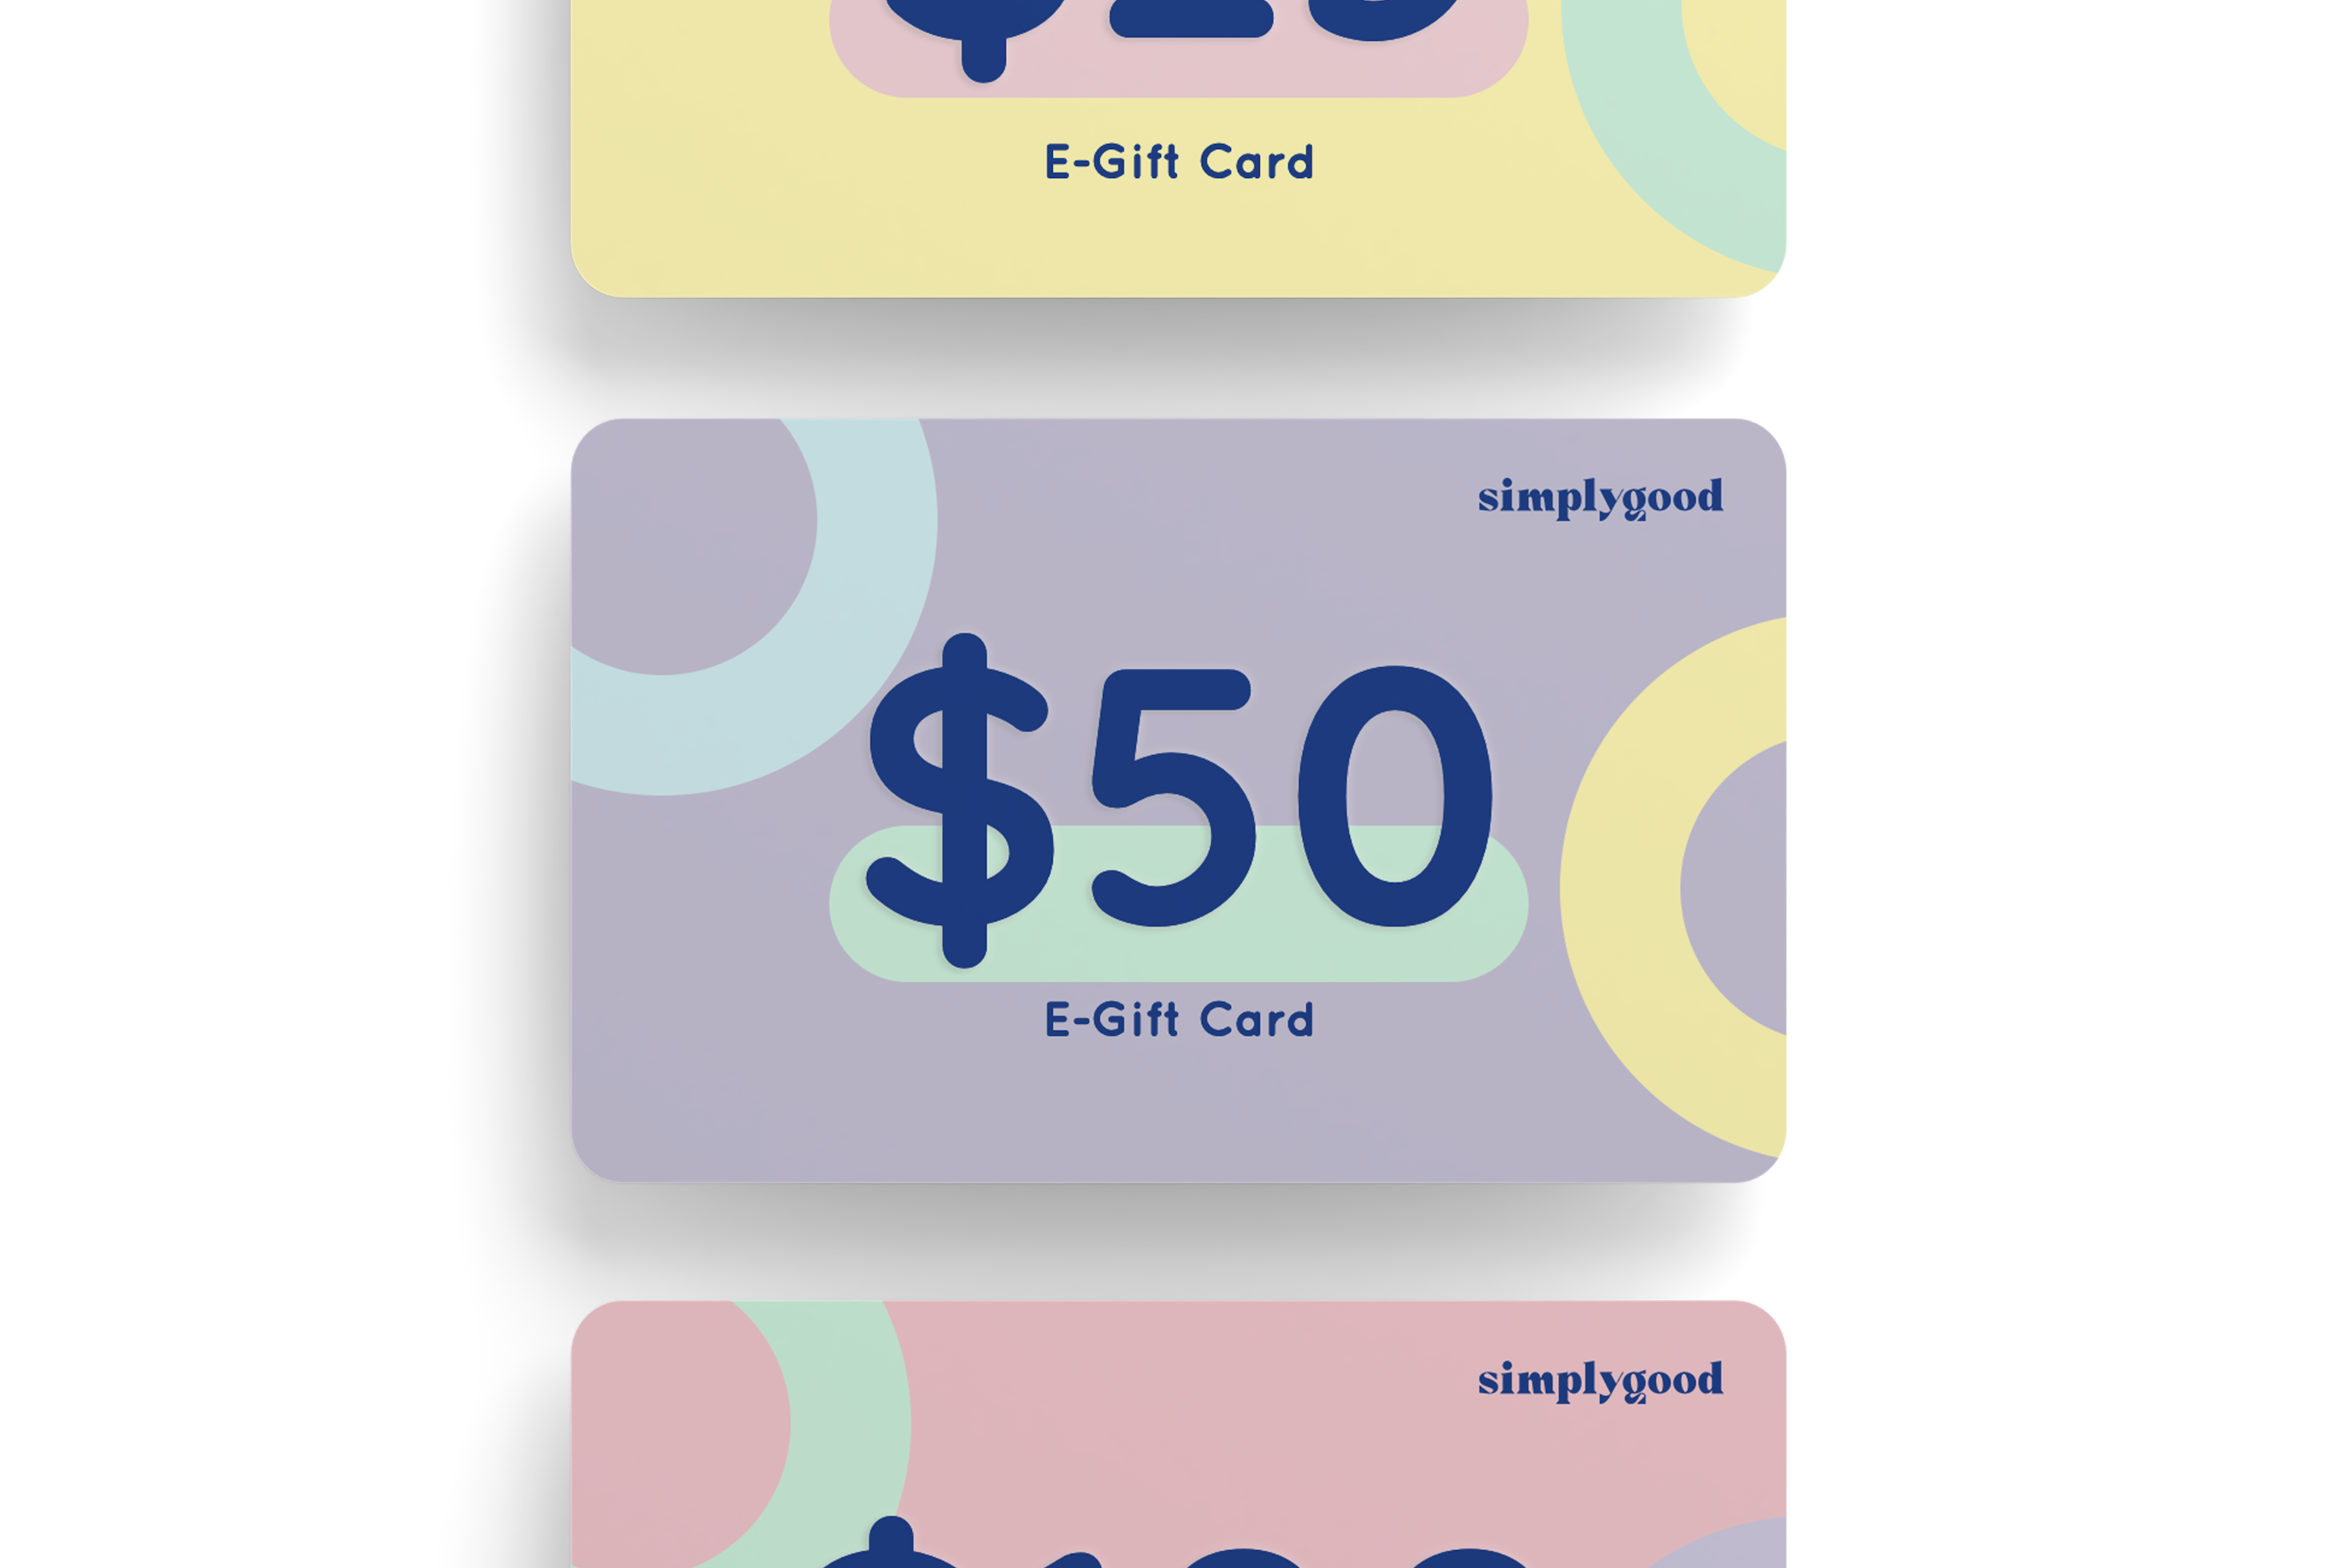 simplygood gift cards